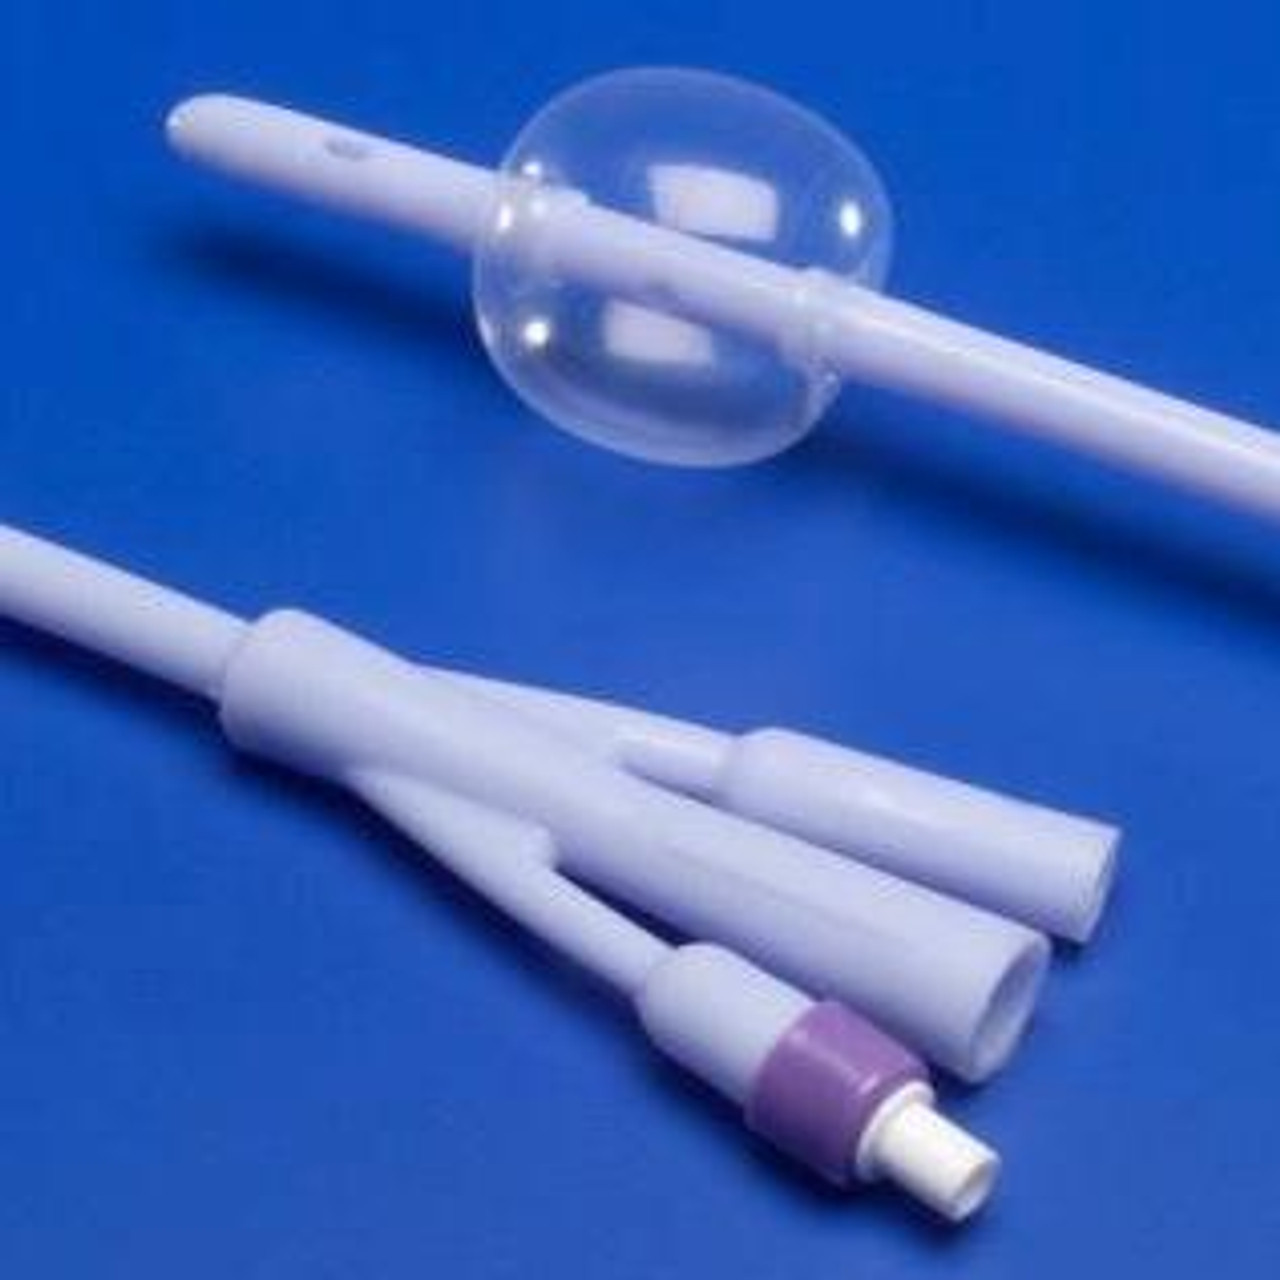 DOVER 100% SILICONE 2-WAY FOLEY CATHETER, 20FR 5CC BX/10 (MDT-8887605205)